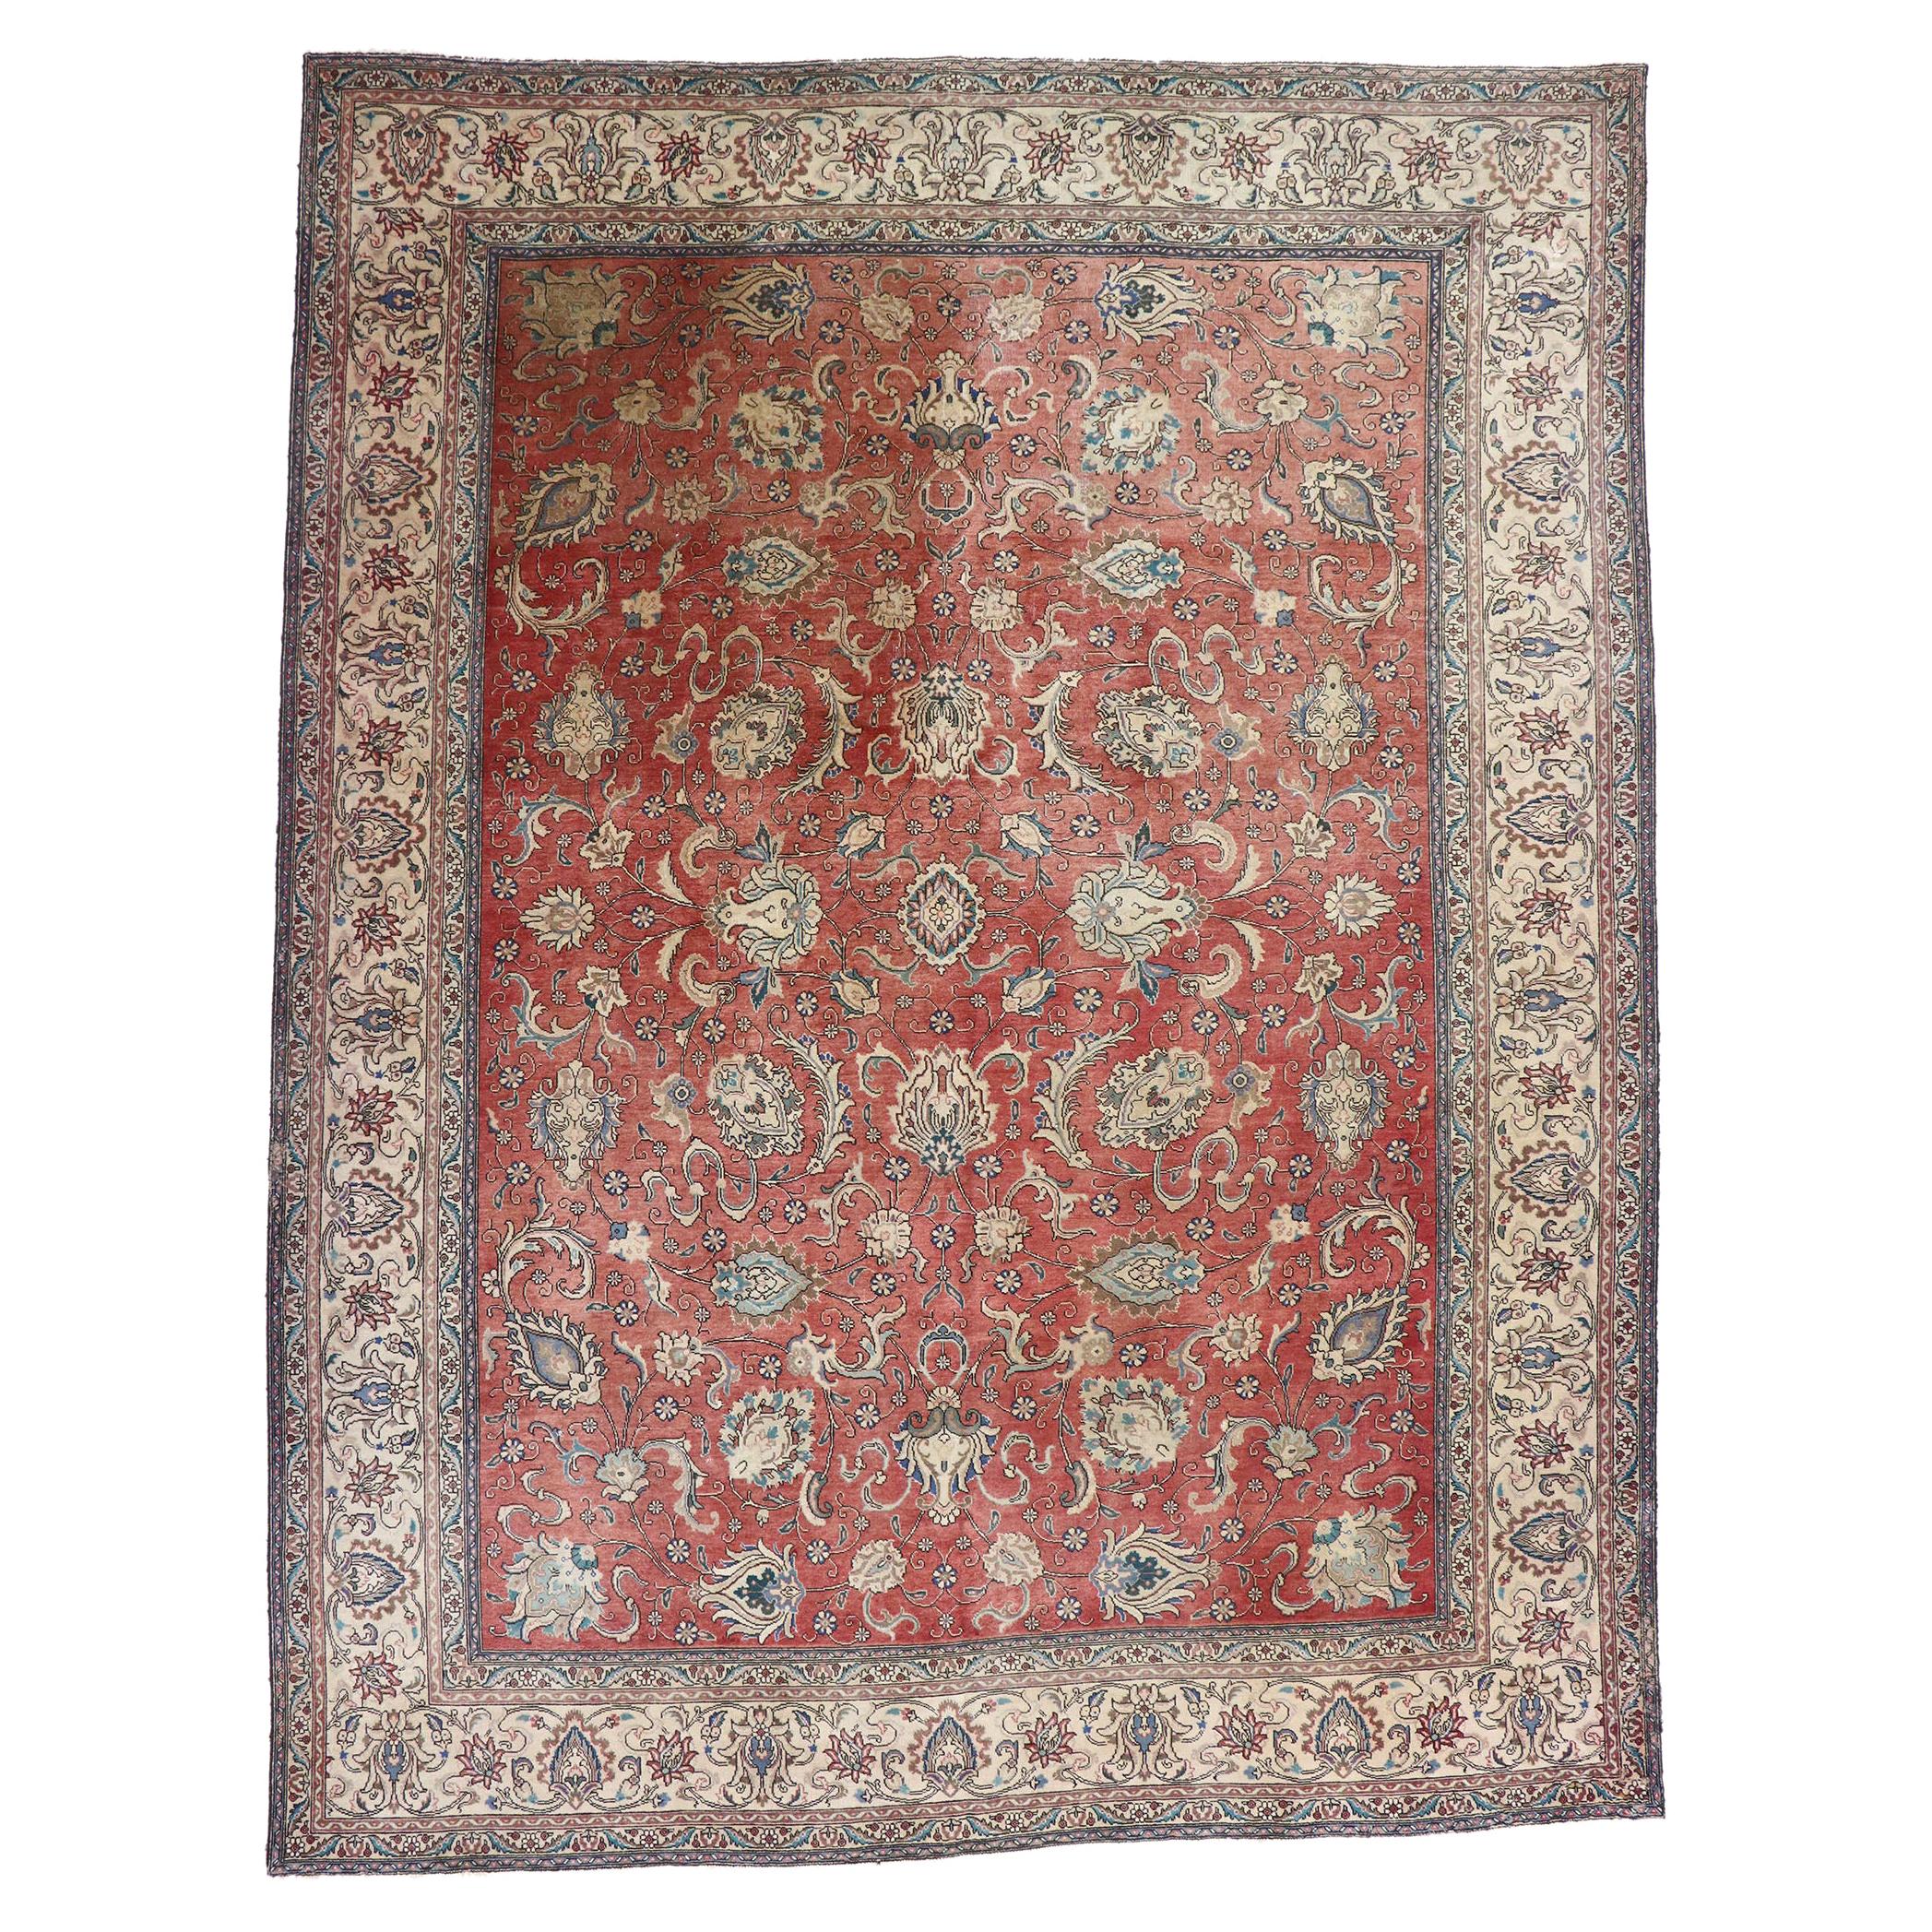 Antique Persian Tabriz Rug with Rustic Federal Style